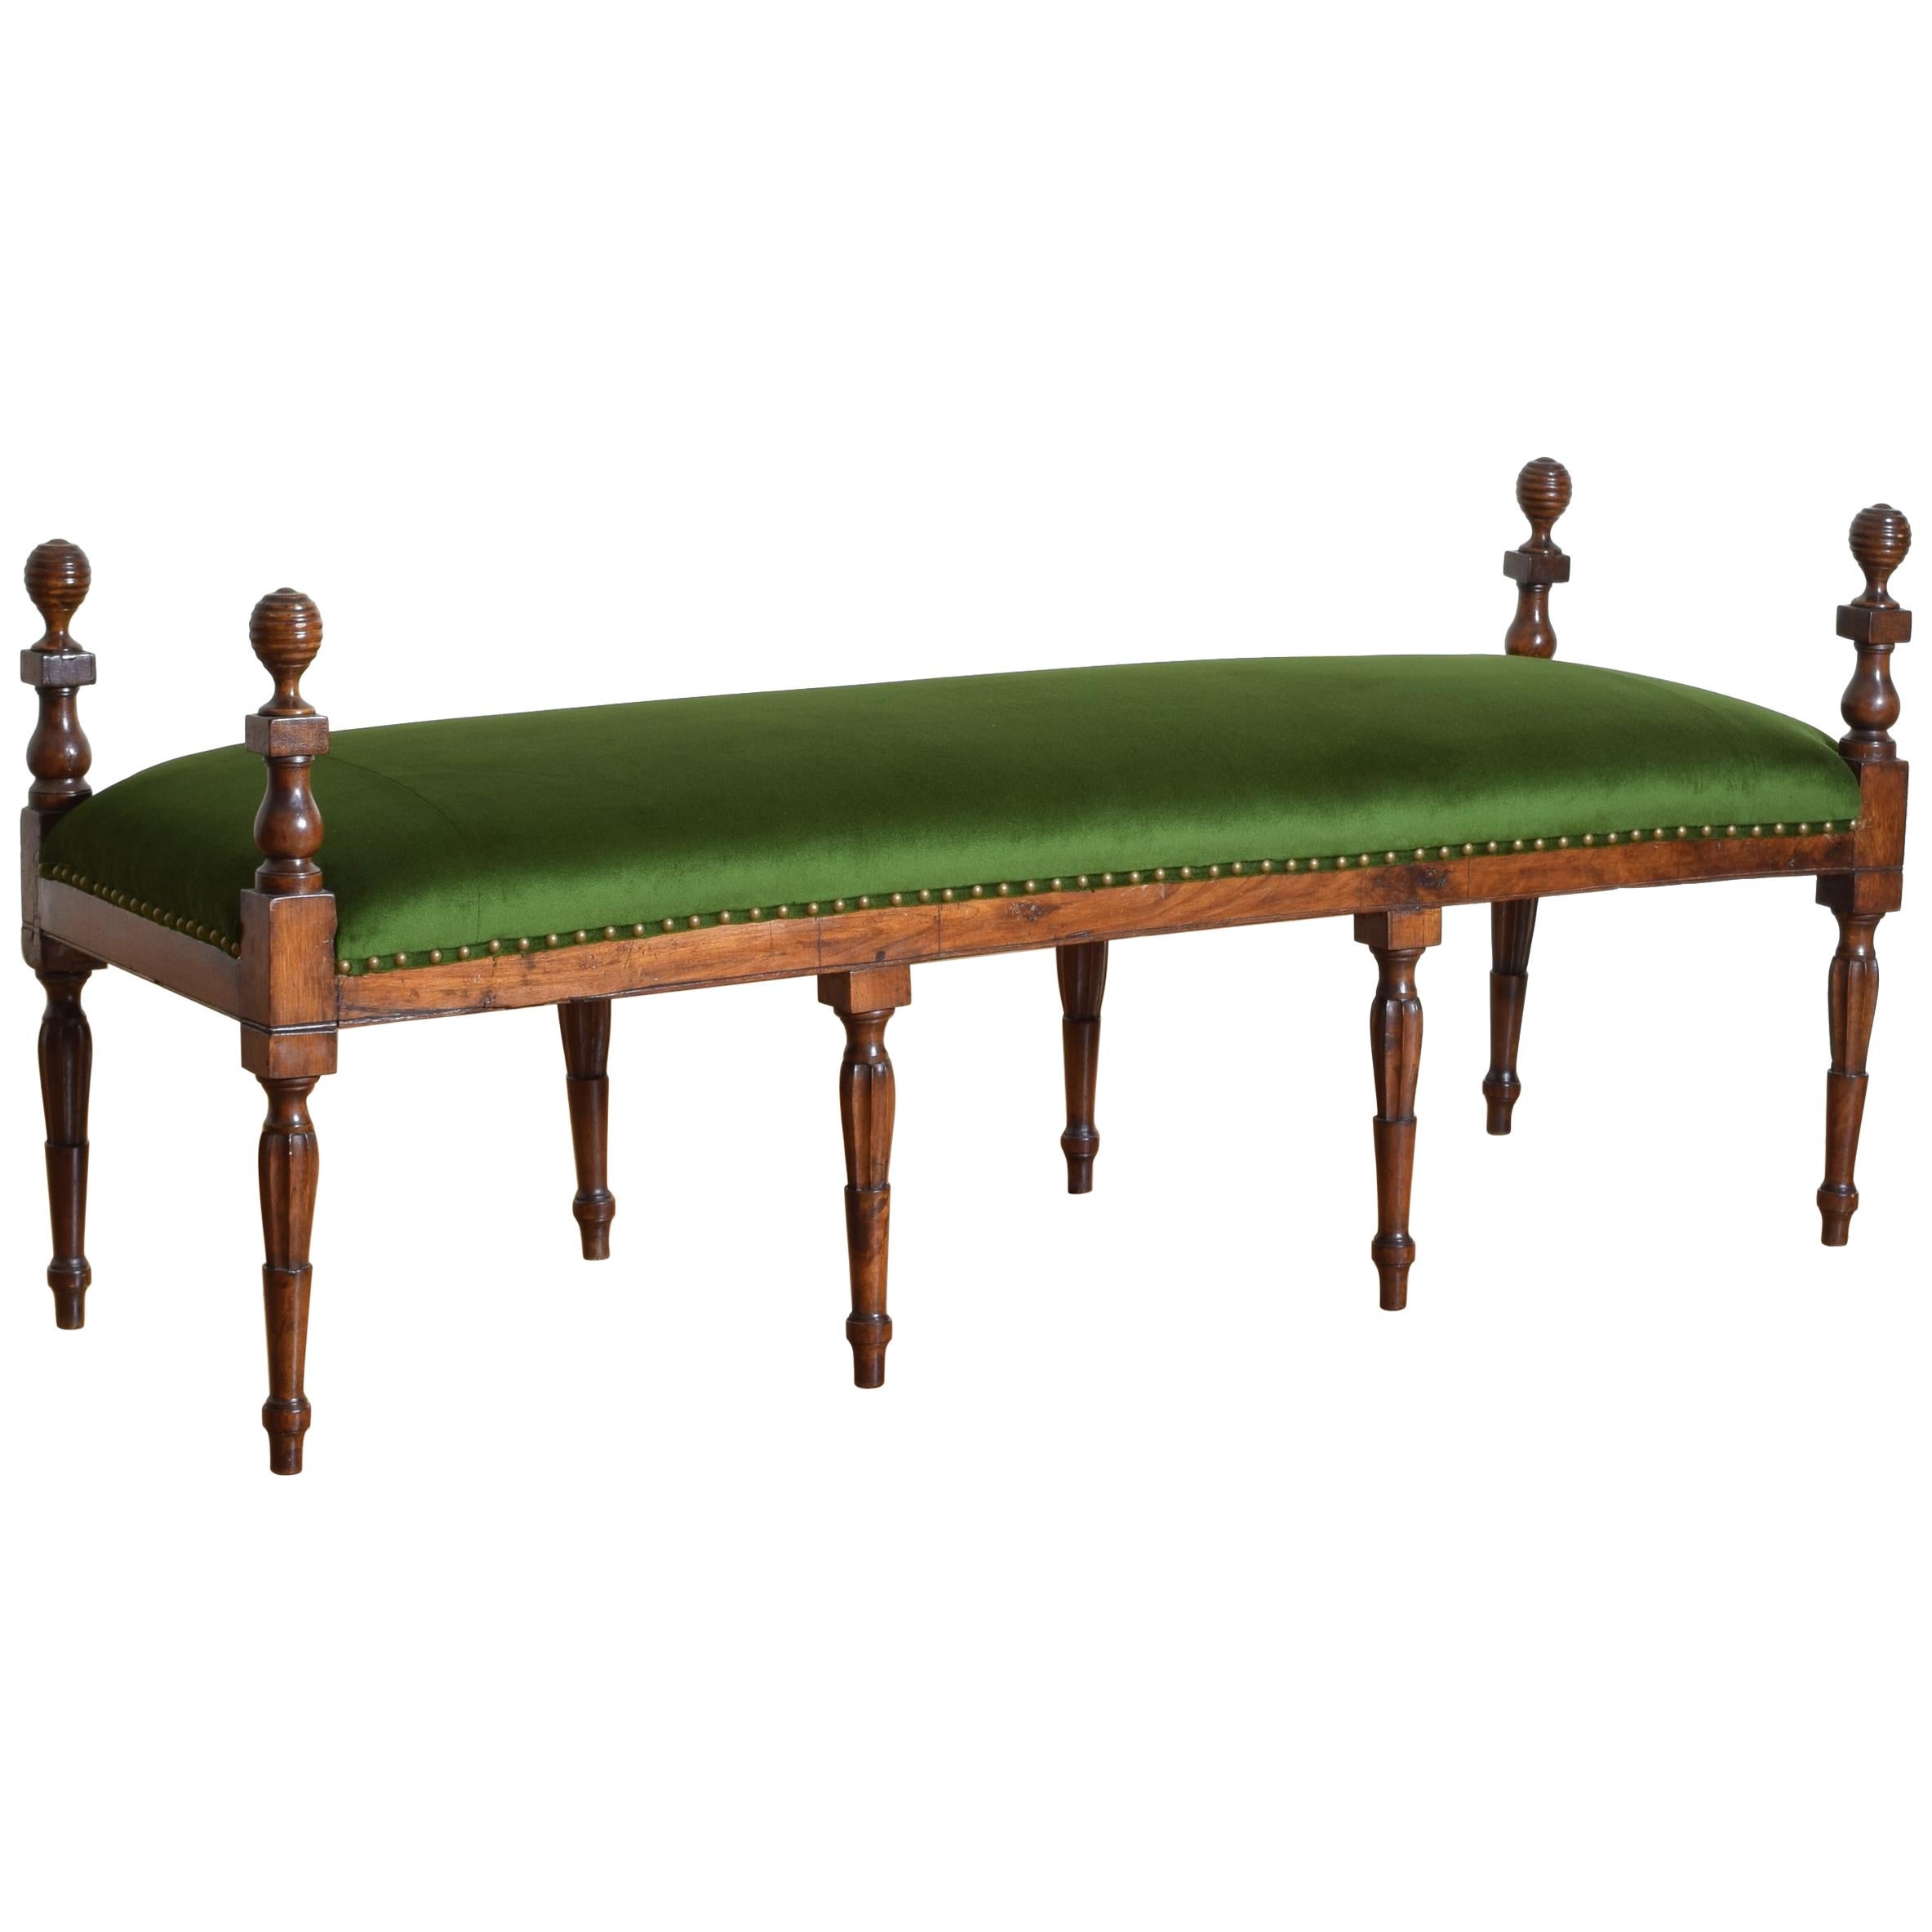 Nothern Italian Carved Walnut and Upholstered Bench Late 18th-Early 19th Century